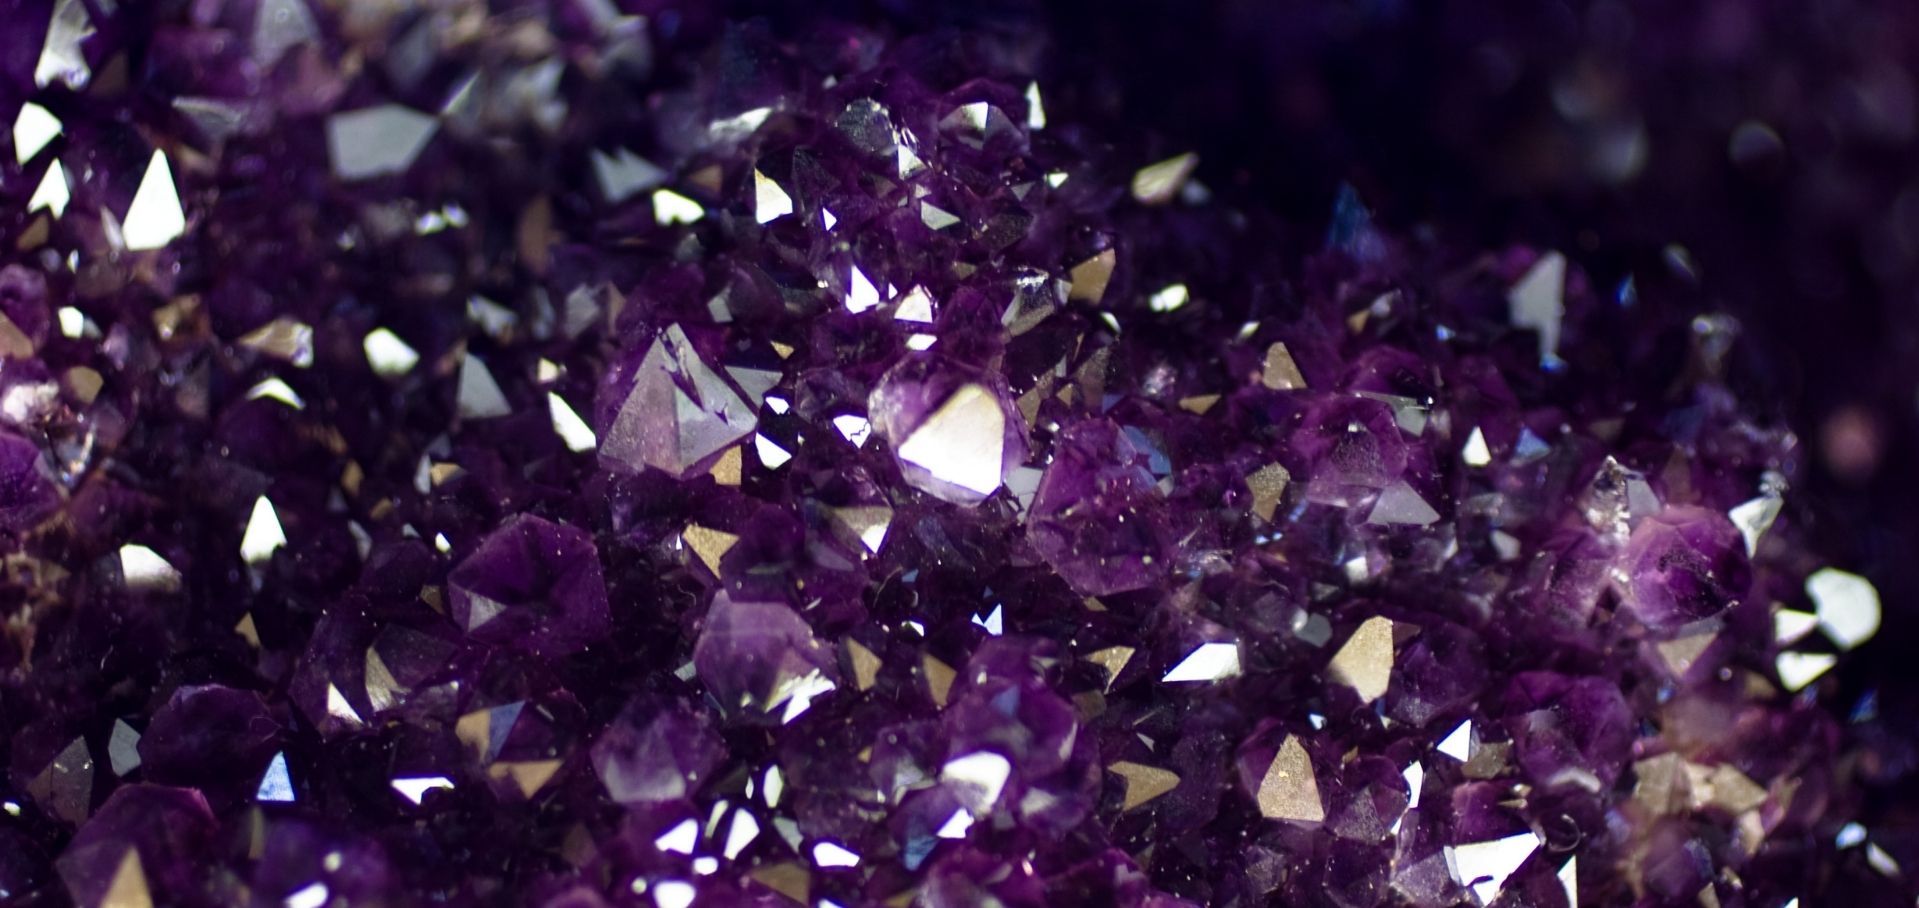 The Violet Beauty: A Guide to the Gemstone Amethyst